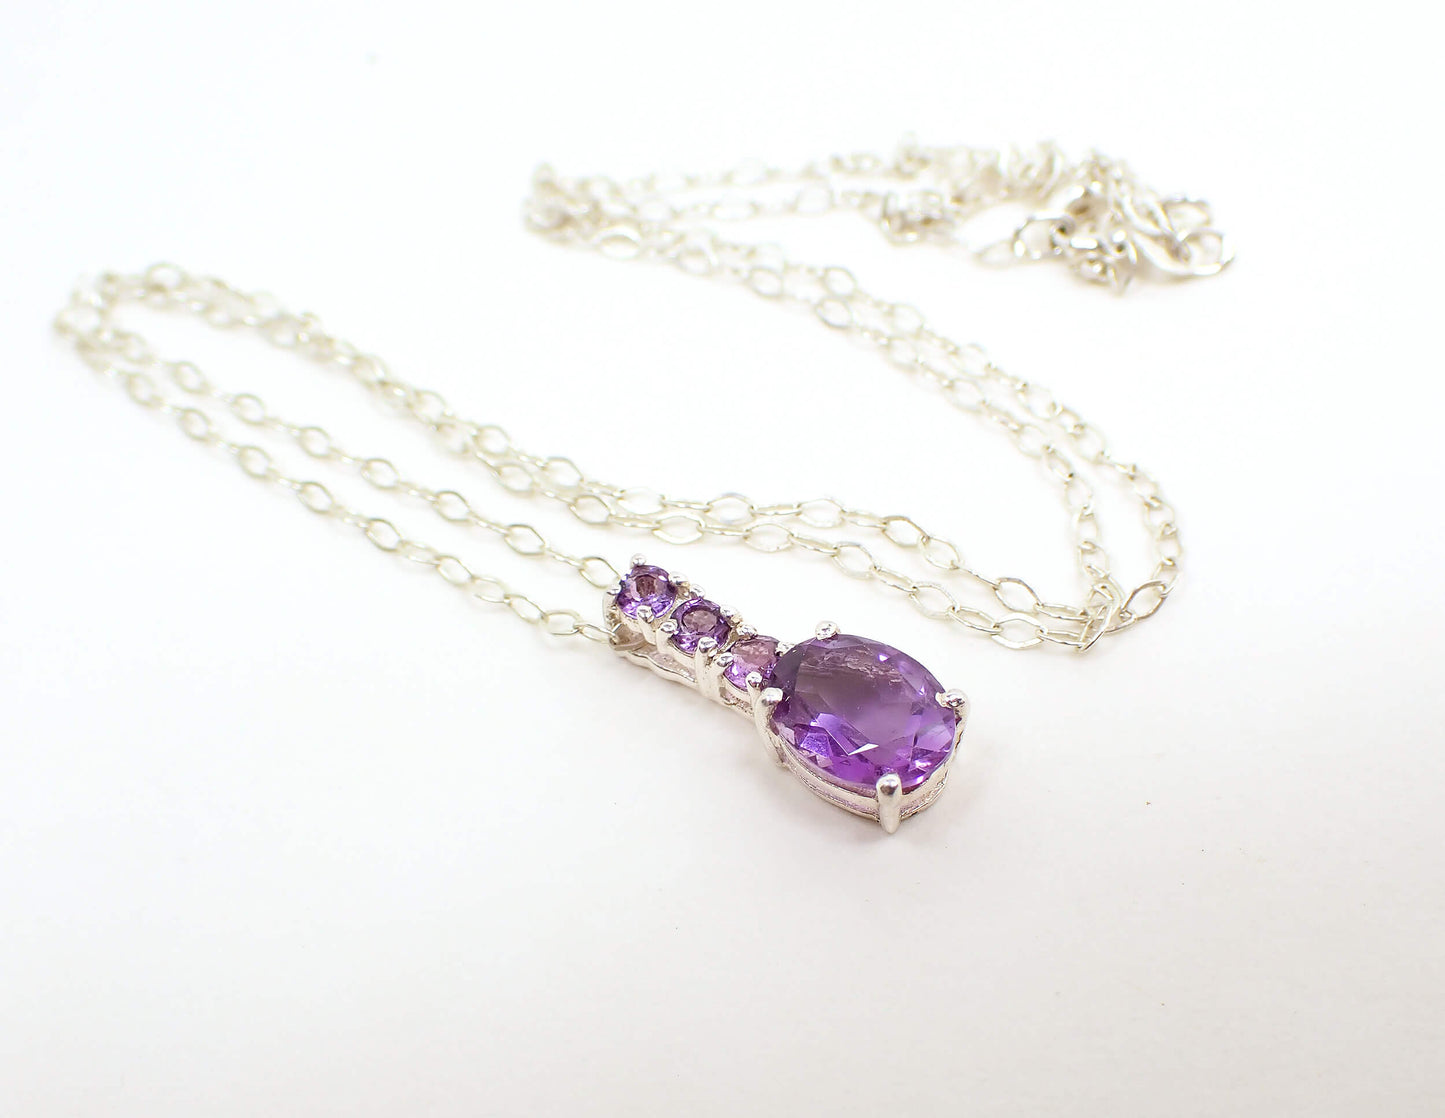 Small Dainty Sterling Silver Vintage Amethyst Pendant Necklace